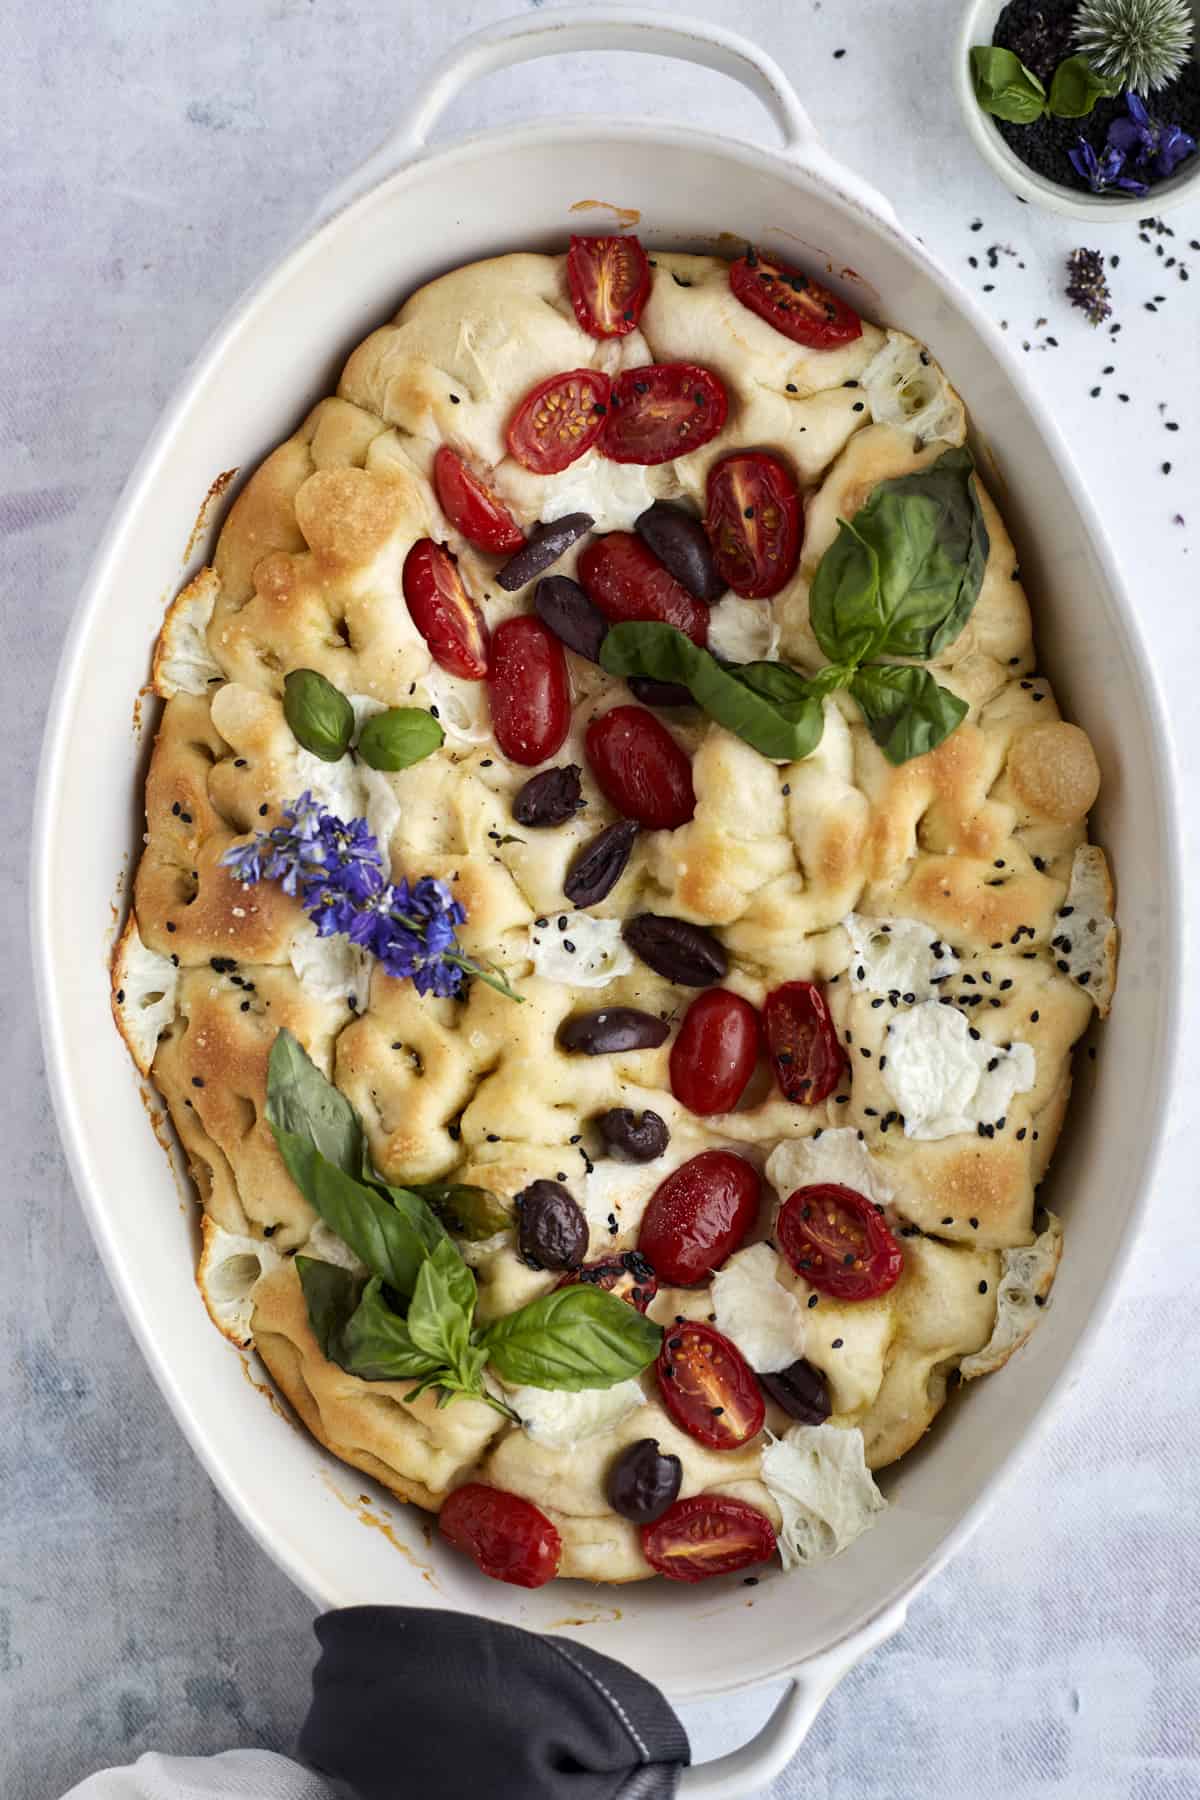 baked no knead focaccia bread with tomatoes, olives, fresh herbs, mozzarella, and herbs